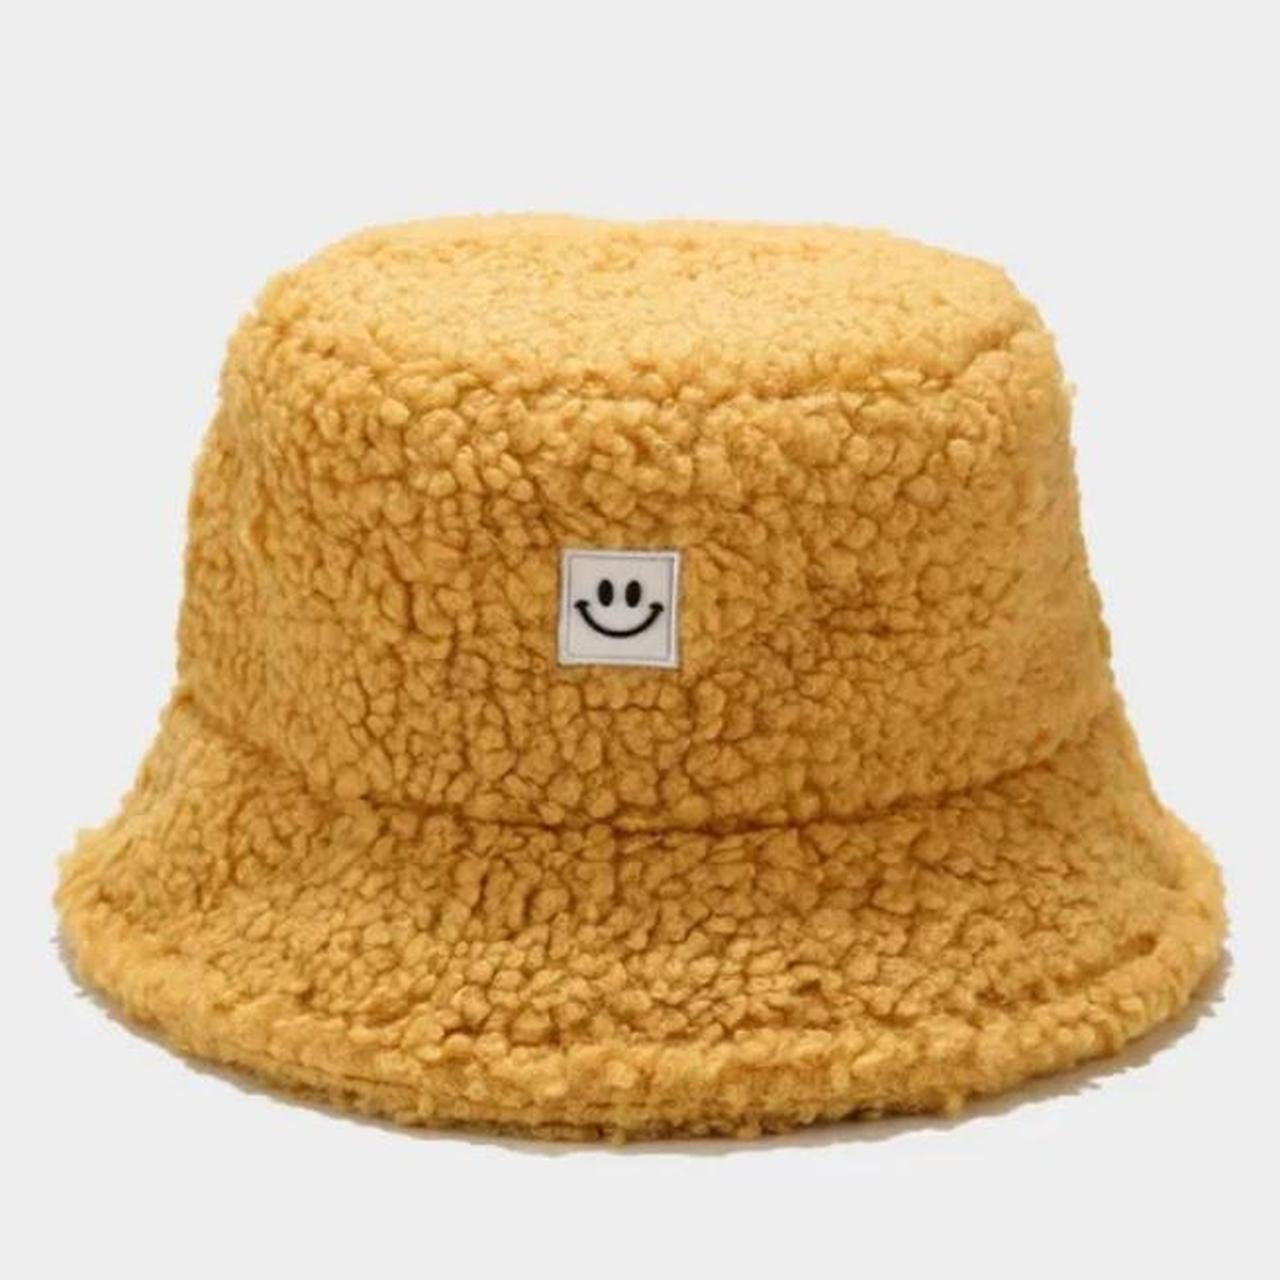 Yellow Fuzzy Smiley Face Bucket Hat